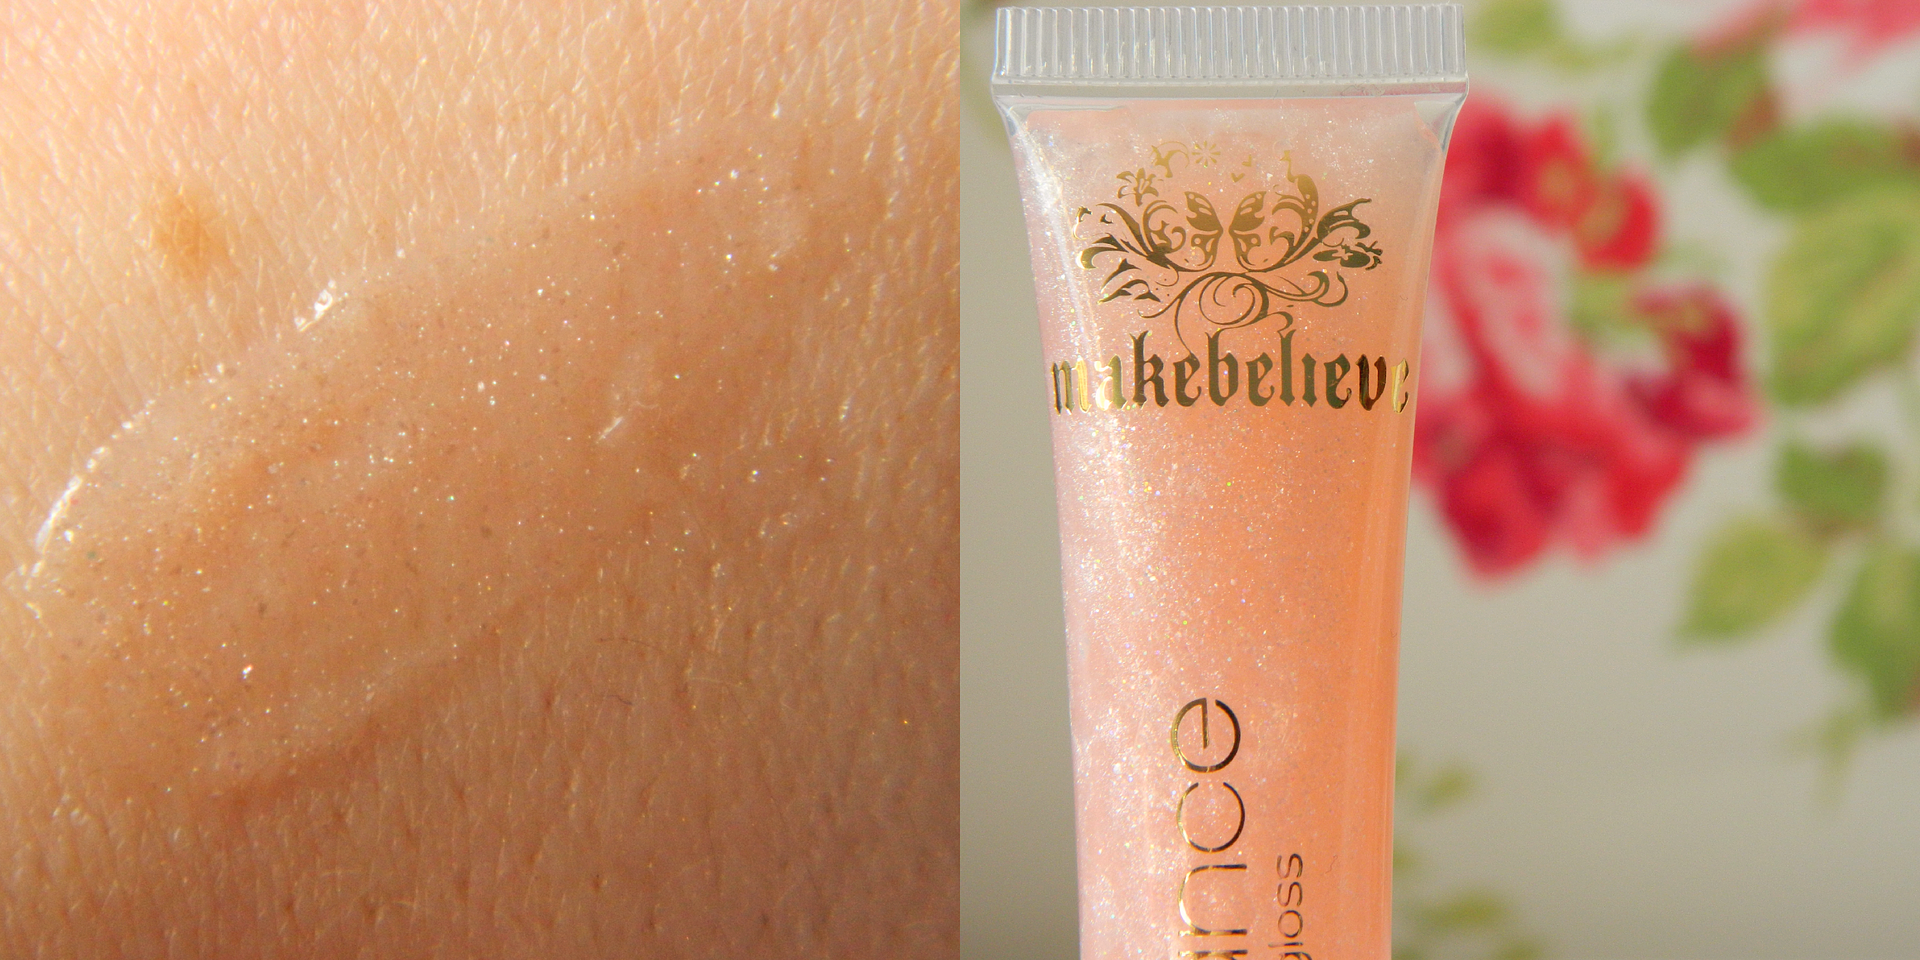 Makebelieve Enhance Makeup Shimmer Lip Gloss Swatch Review Belle-amie